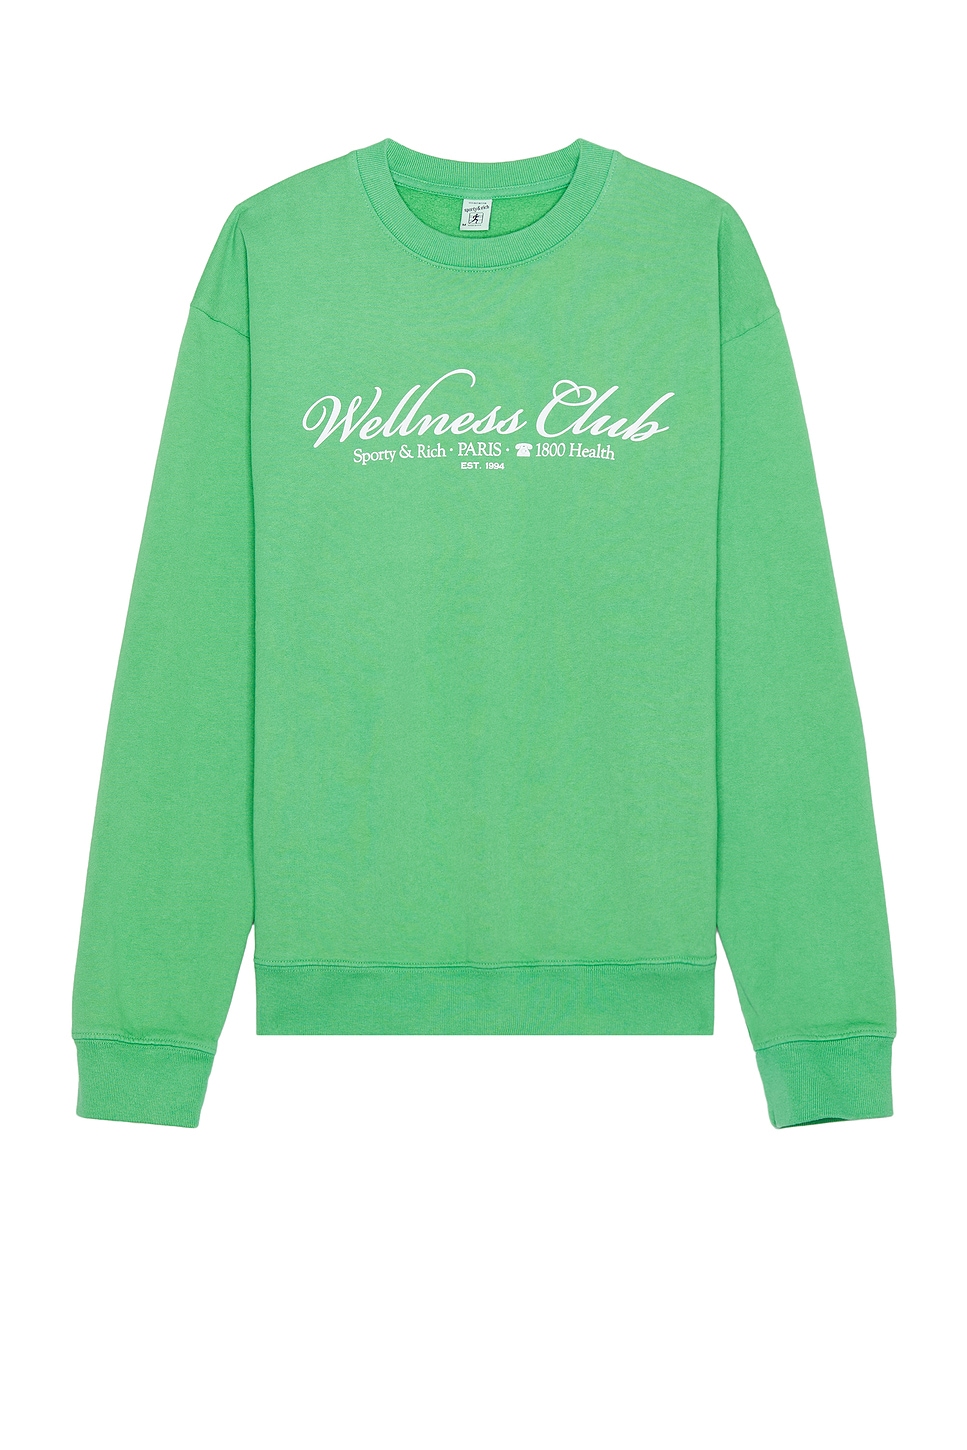 Image 1 of Sporty & Rich 1800 Health Crewneck in Verde